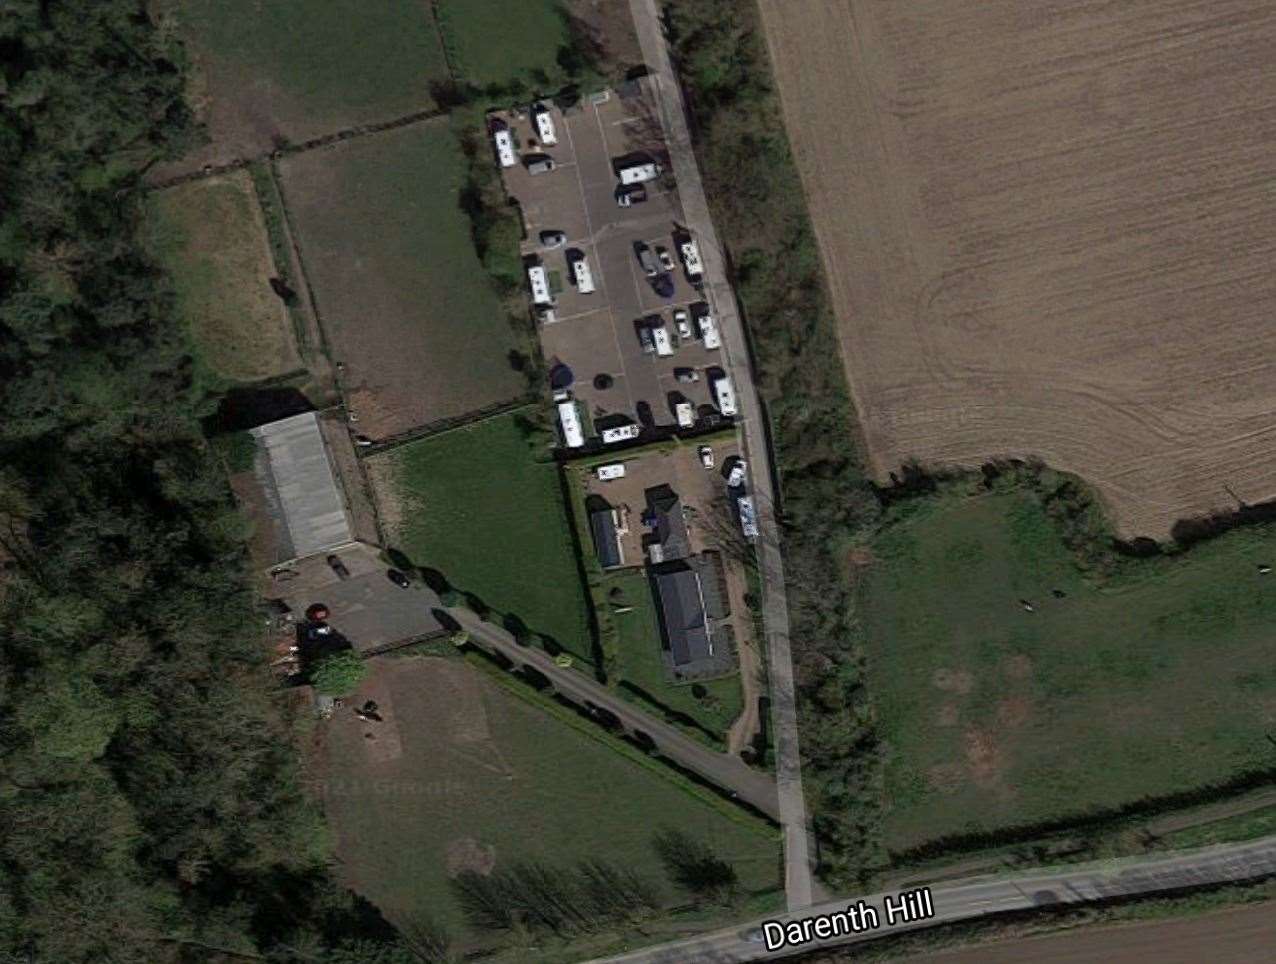 The application site for an extension of a gypsy traveller site off Darenth Hill. Picture: Google Maps